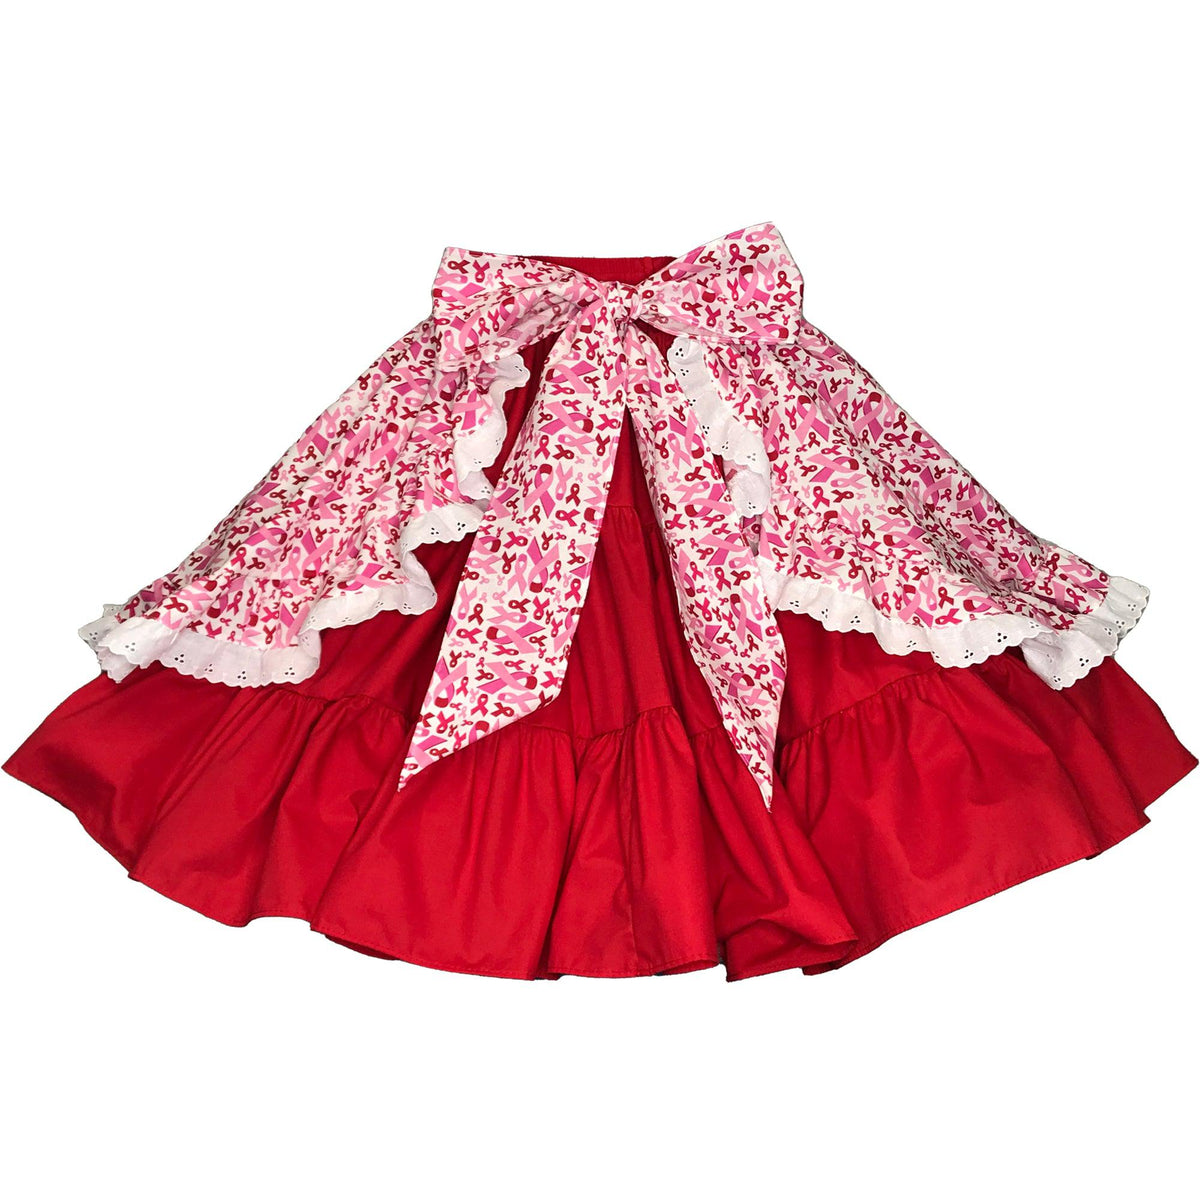 A red and white floral skirt with ruffles, featuring Square Up Fashions Pink Ribbon Apron.